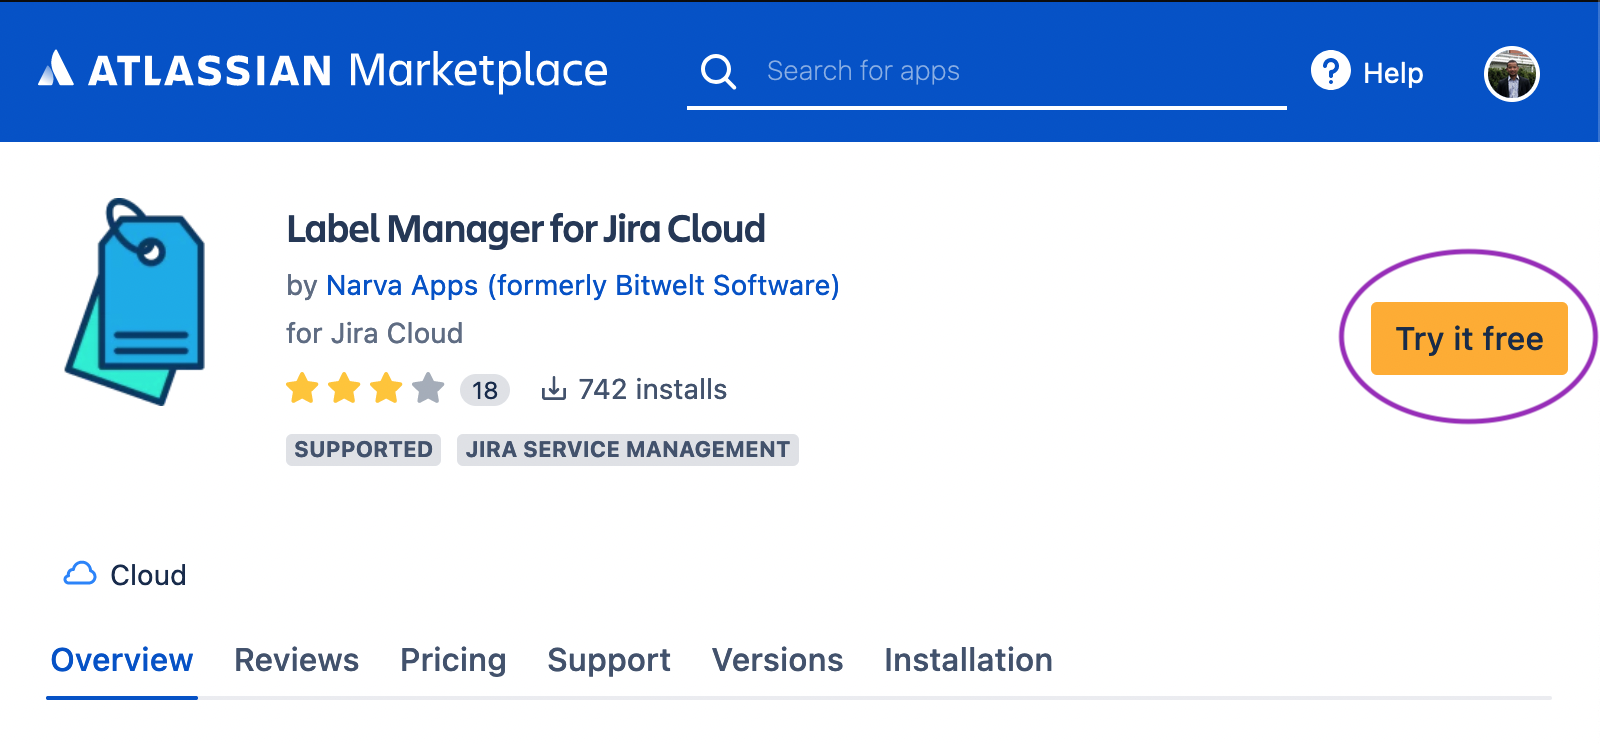 Label Manager for Jira Cloud - Atlassian Marketplace